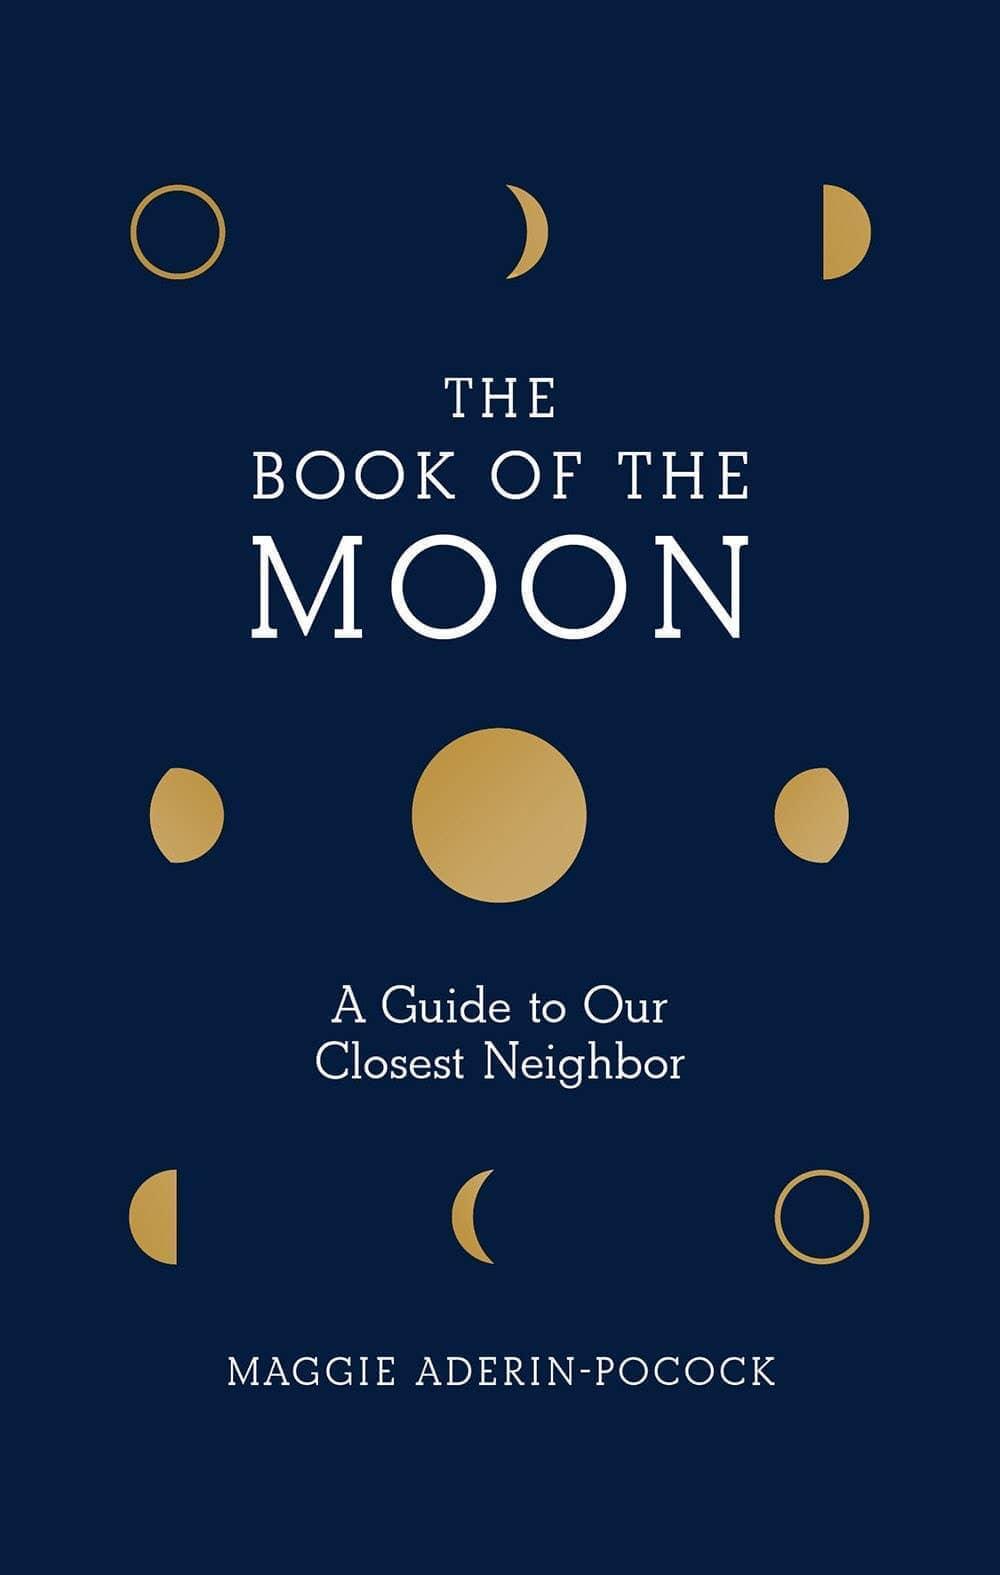 Book of the Moon: A Guide to Our Closest Neighbor - Esme and Elodie